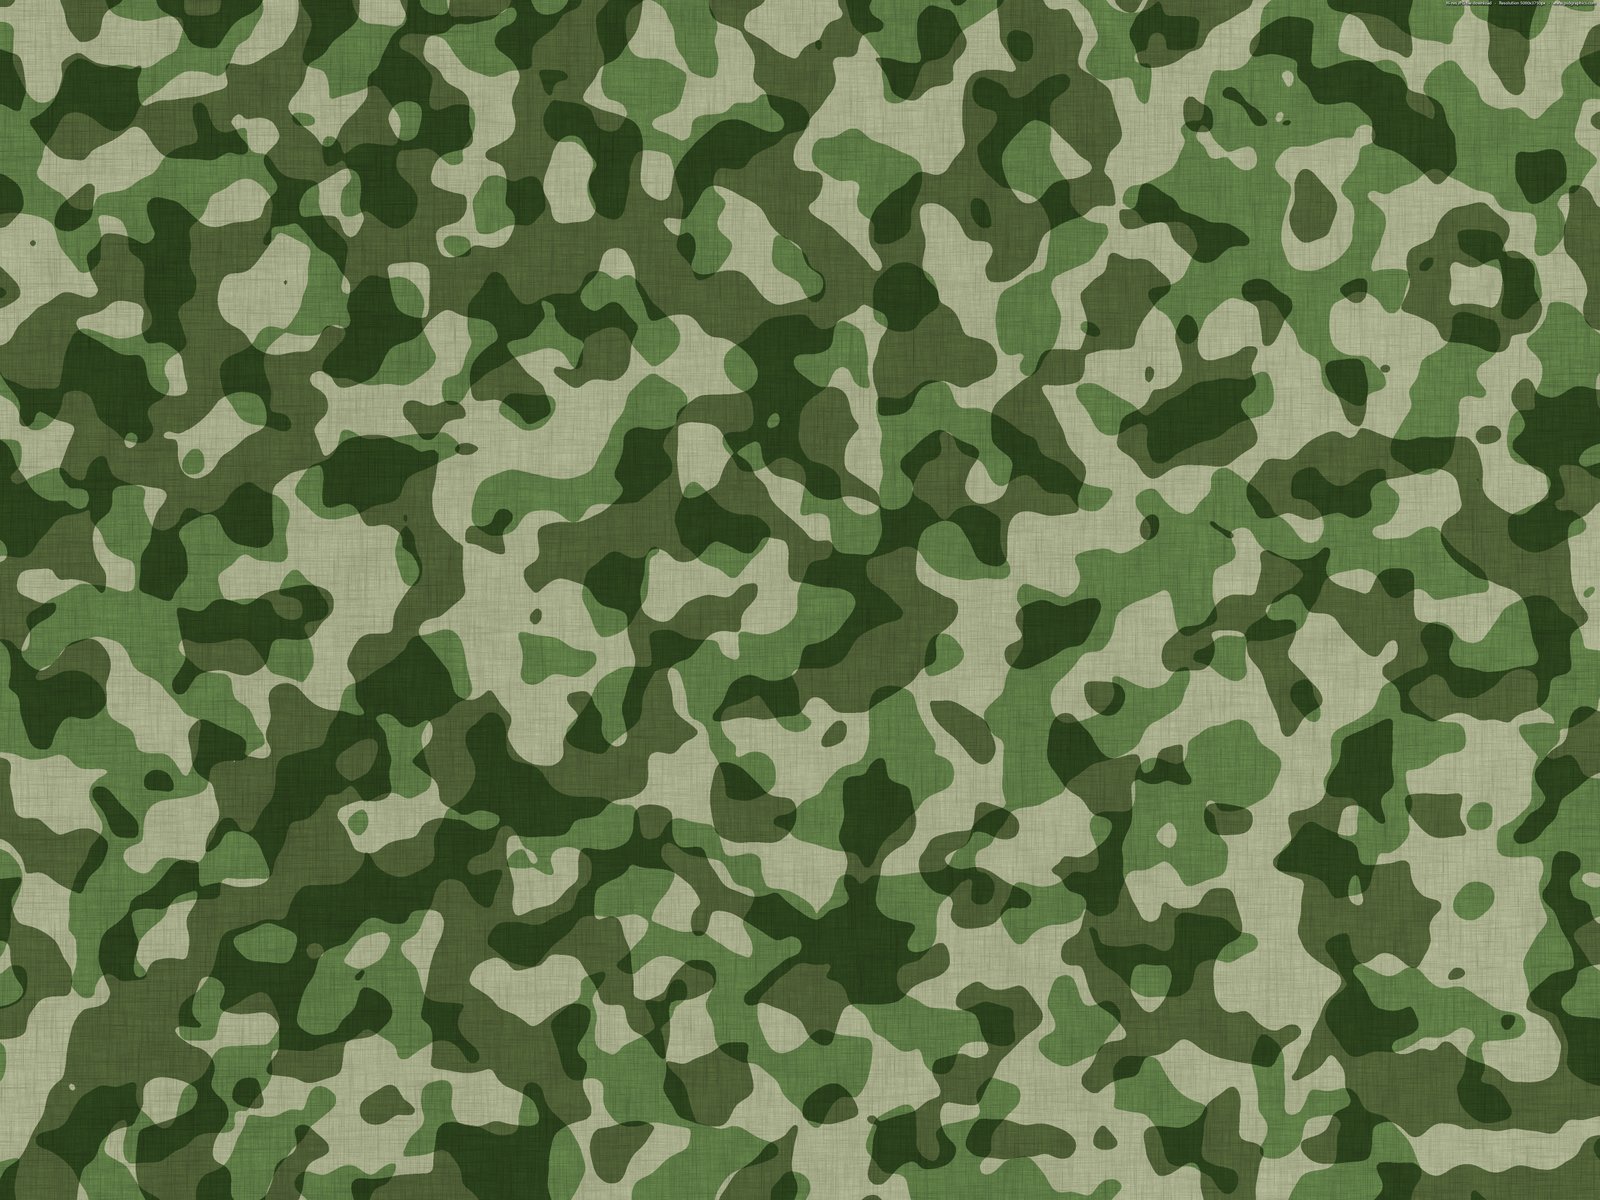 Types of camouflage patterns - kittyglop